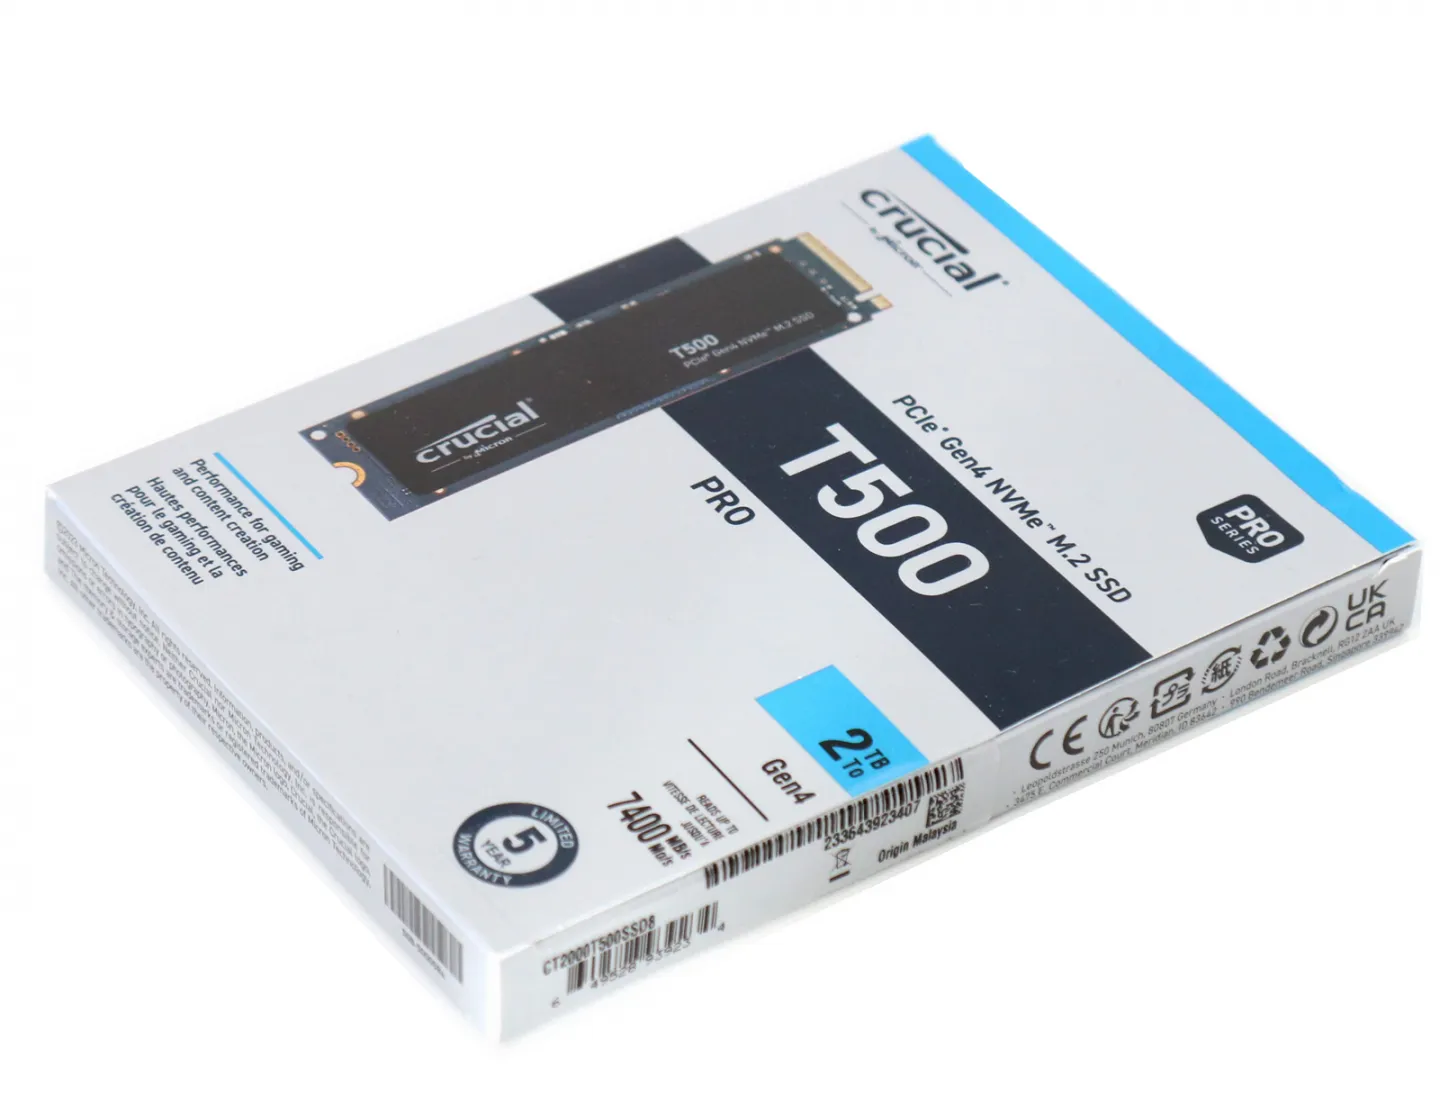 Crucial T500 PRO 2TB PCIe Gen4 NVMe SSD Review